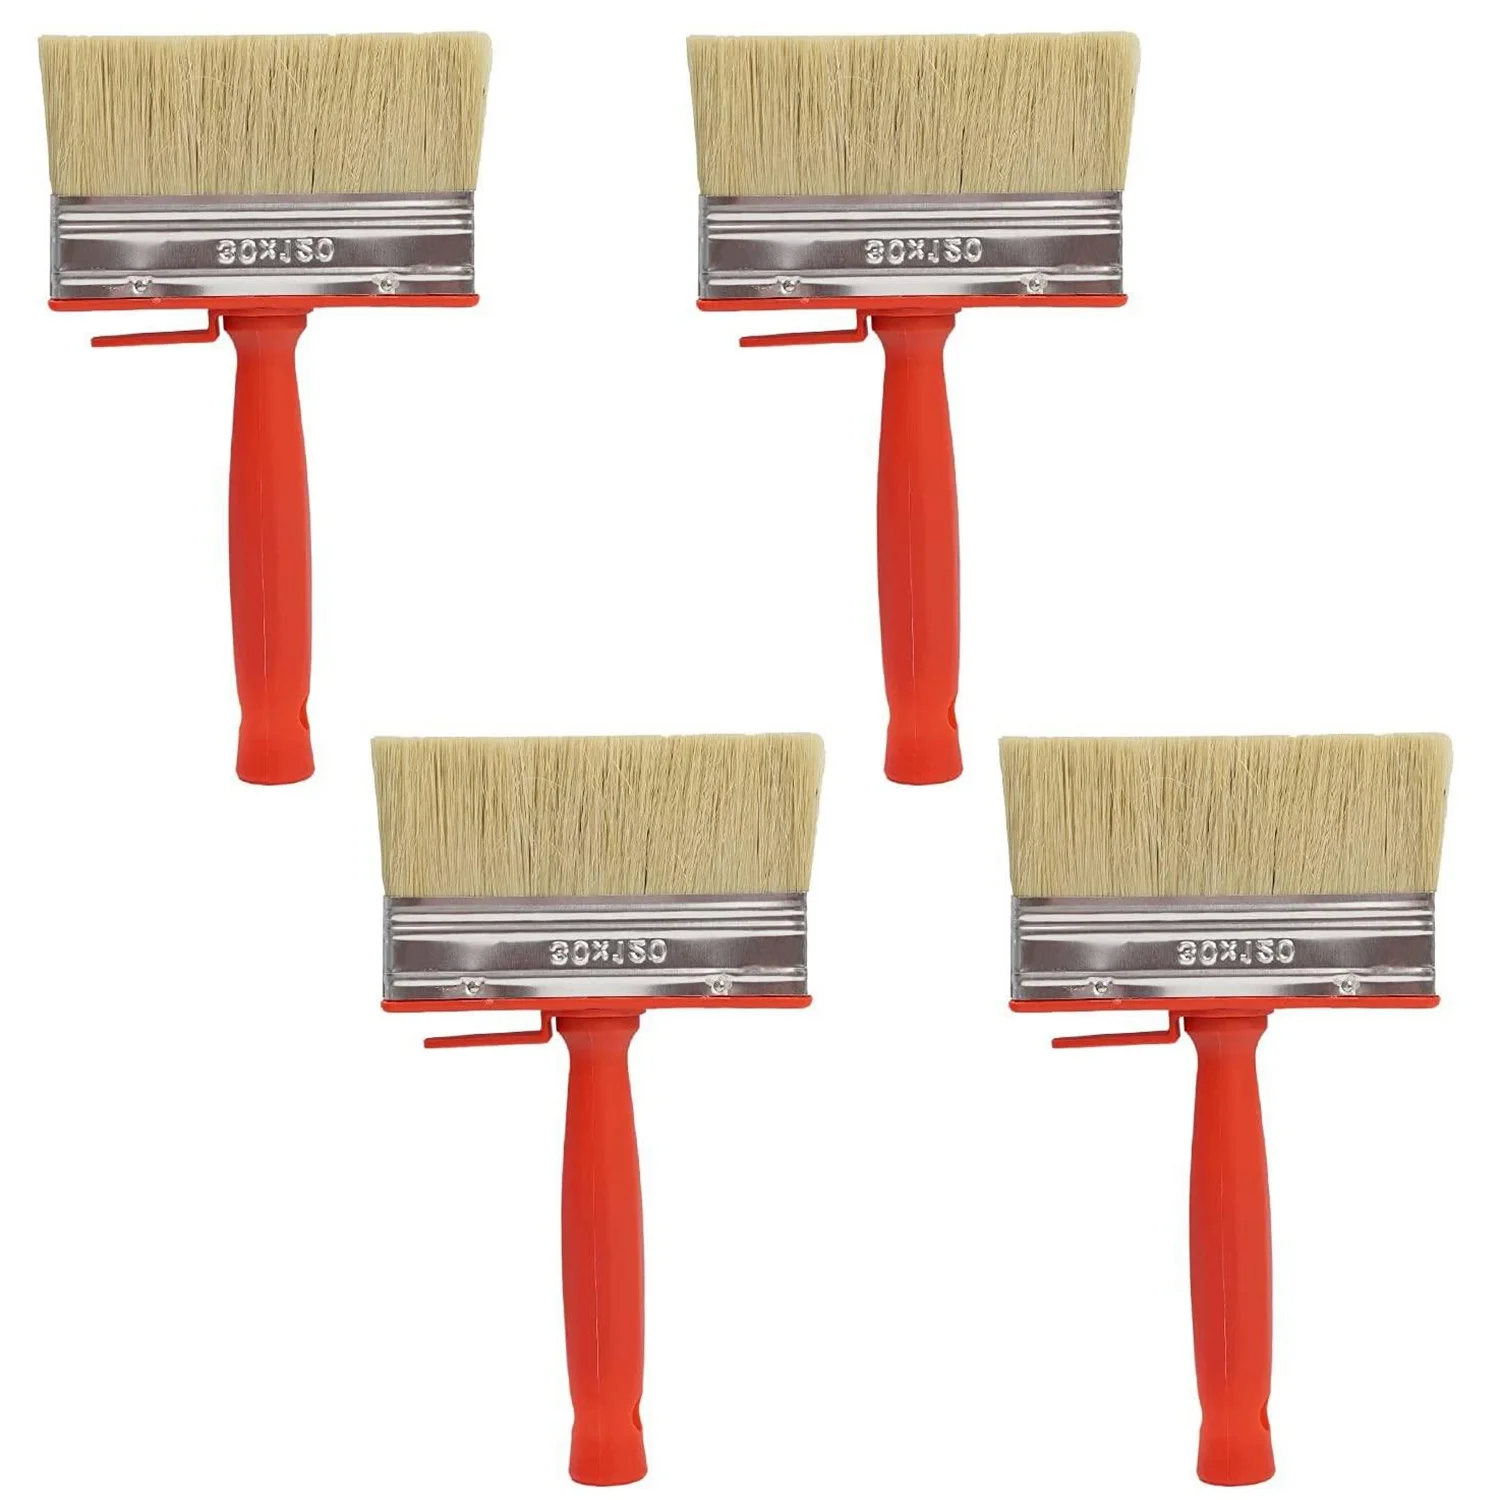 4 Pcs Shed Fence Paint Brushes Decking & Timber Block Stain Brush 4.7Inch/120mm for All Types of Painting Job